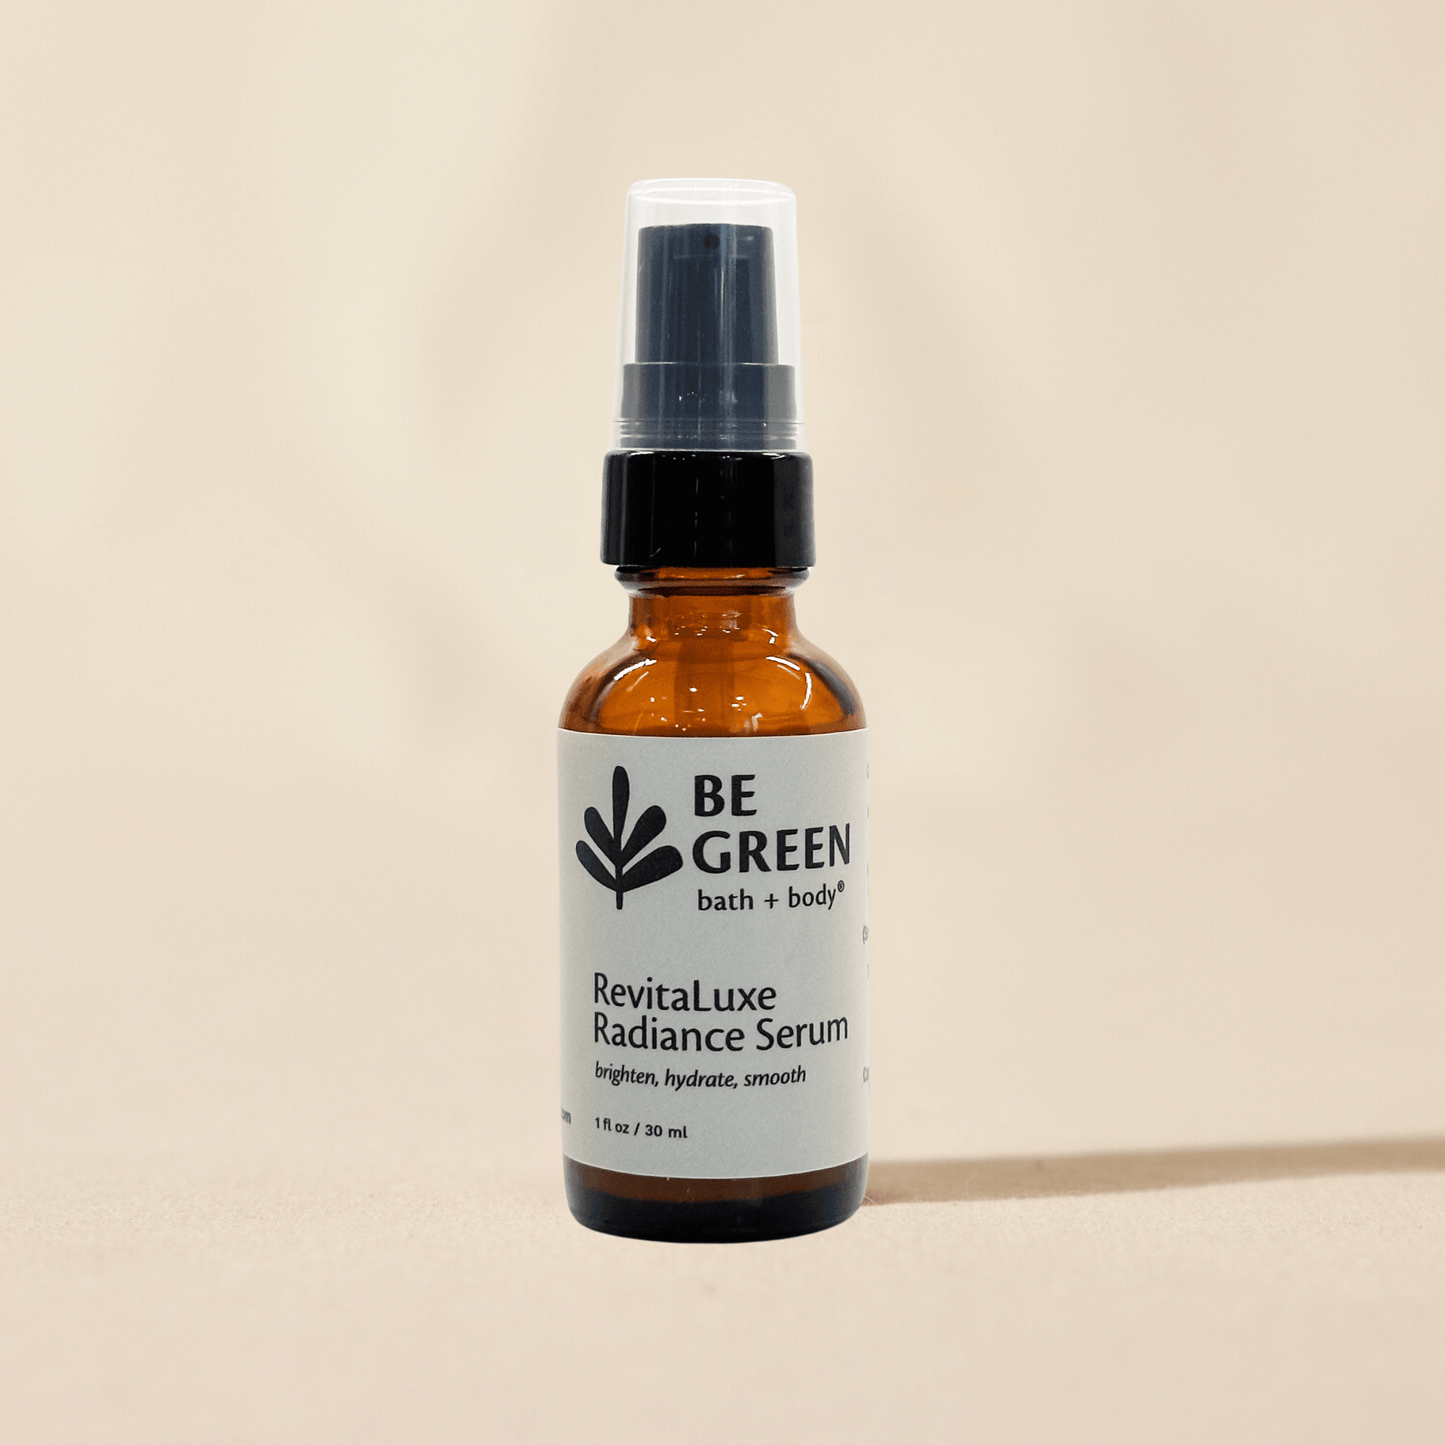 All in one facial serum for sensitive skin with vitamin C, hyaluronic acid and nicacinamide